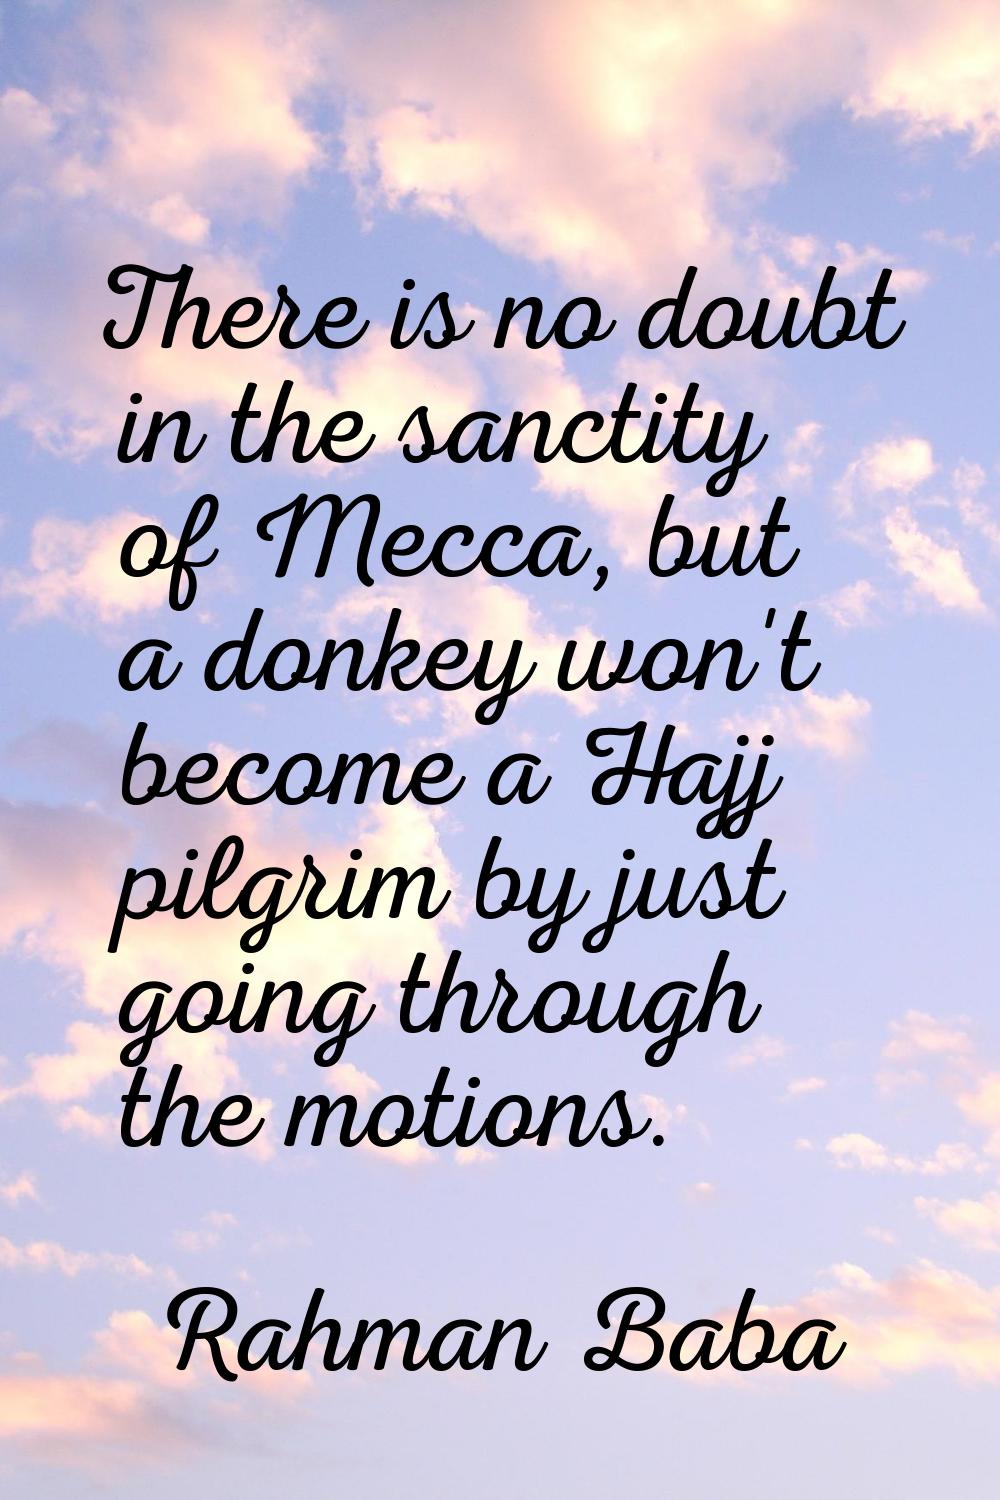 There is no doubt in the sanctity of Mecca, but a donkey won't become a Hajj pilgrim by just going 